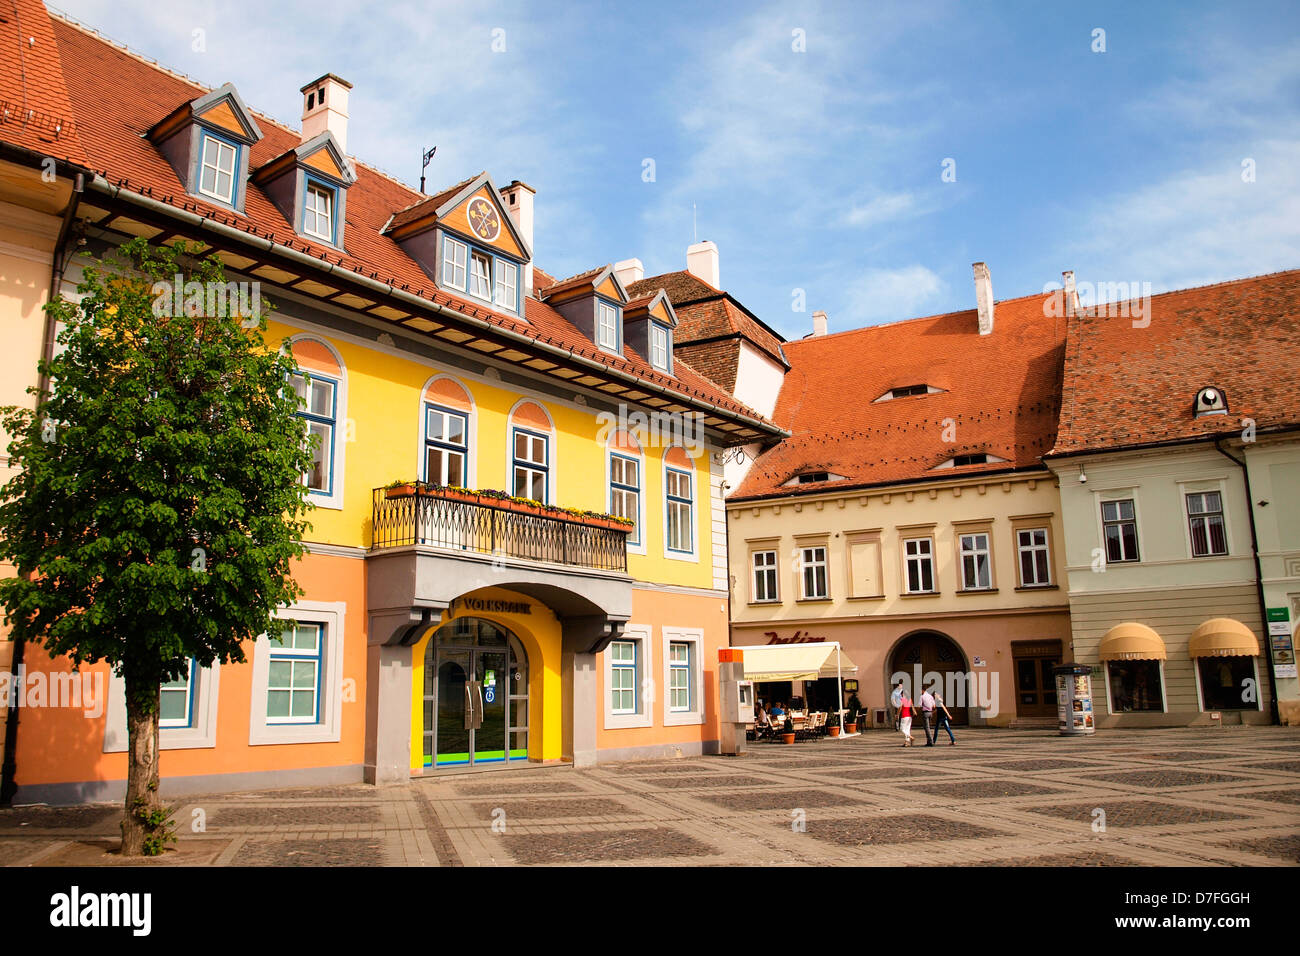 Sibiu, Central Square, the German Forum building, with the coat of arms. European medieval architecture. Stock Photo